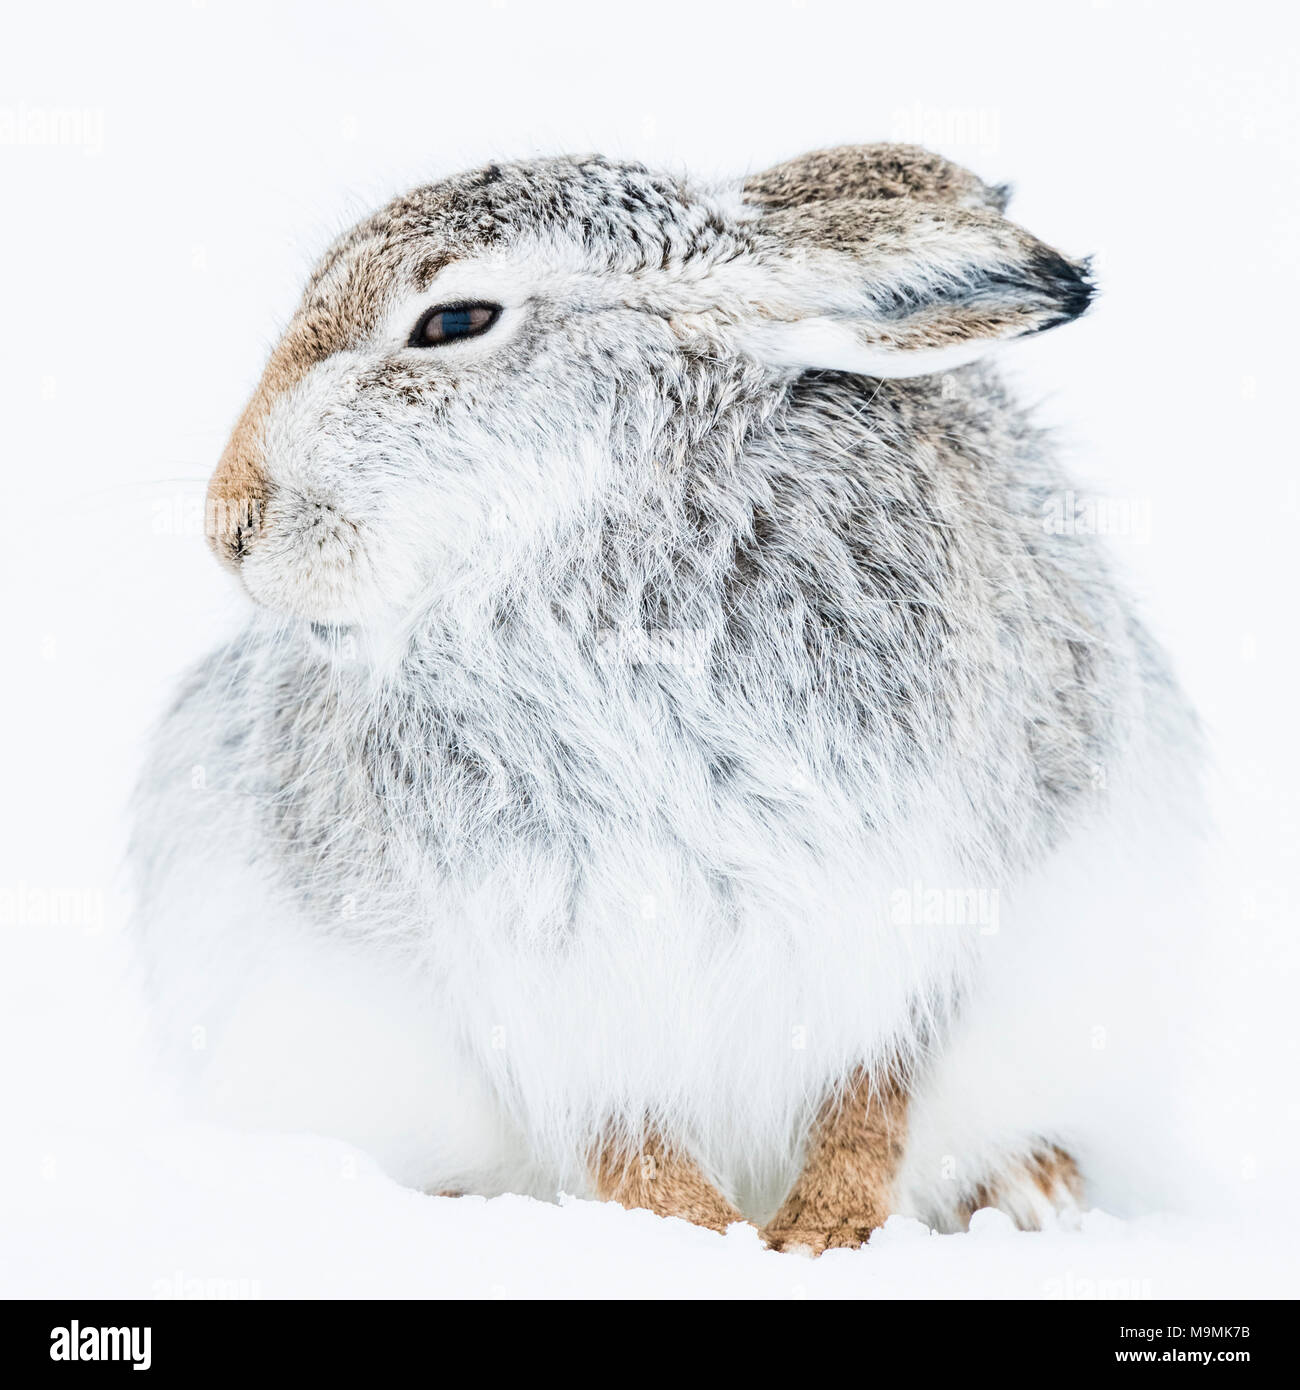 Mountain hare (Lepus timidus) sits in the snow, animal portrait, winter coat, Cairngroms National Park, Highlands, Scotland Stock Photo